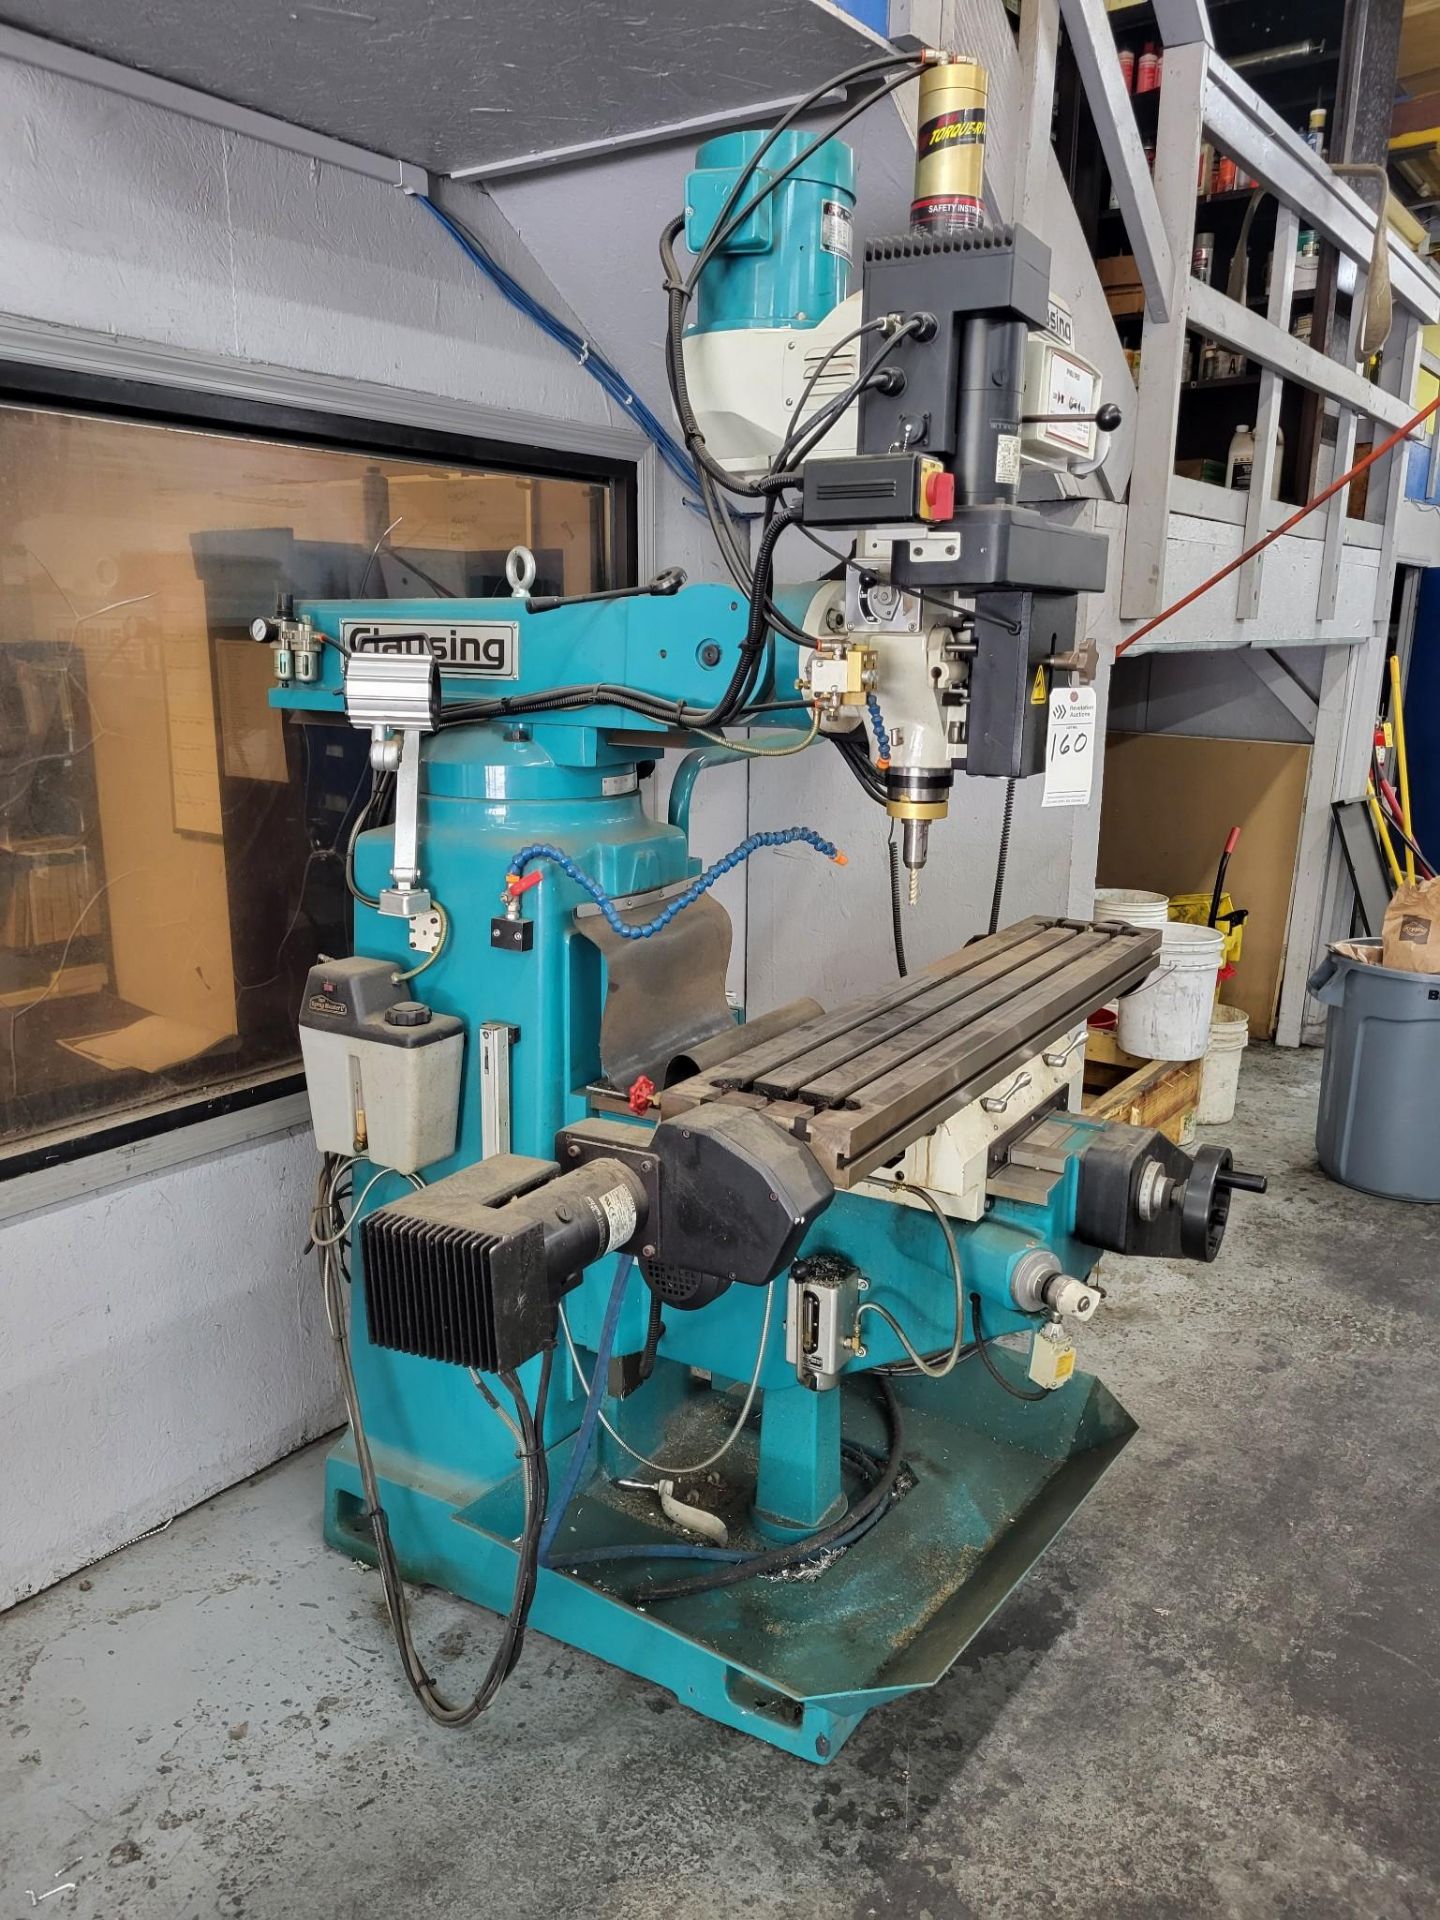 CLAUSING 4VSQ40 10" X 54" VERTICAL KNEE MILL - Image 2 of 11